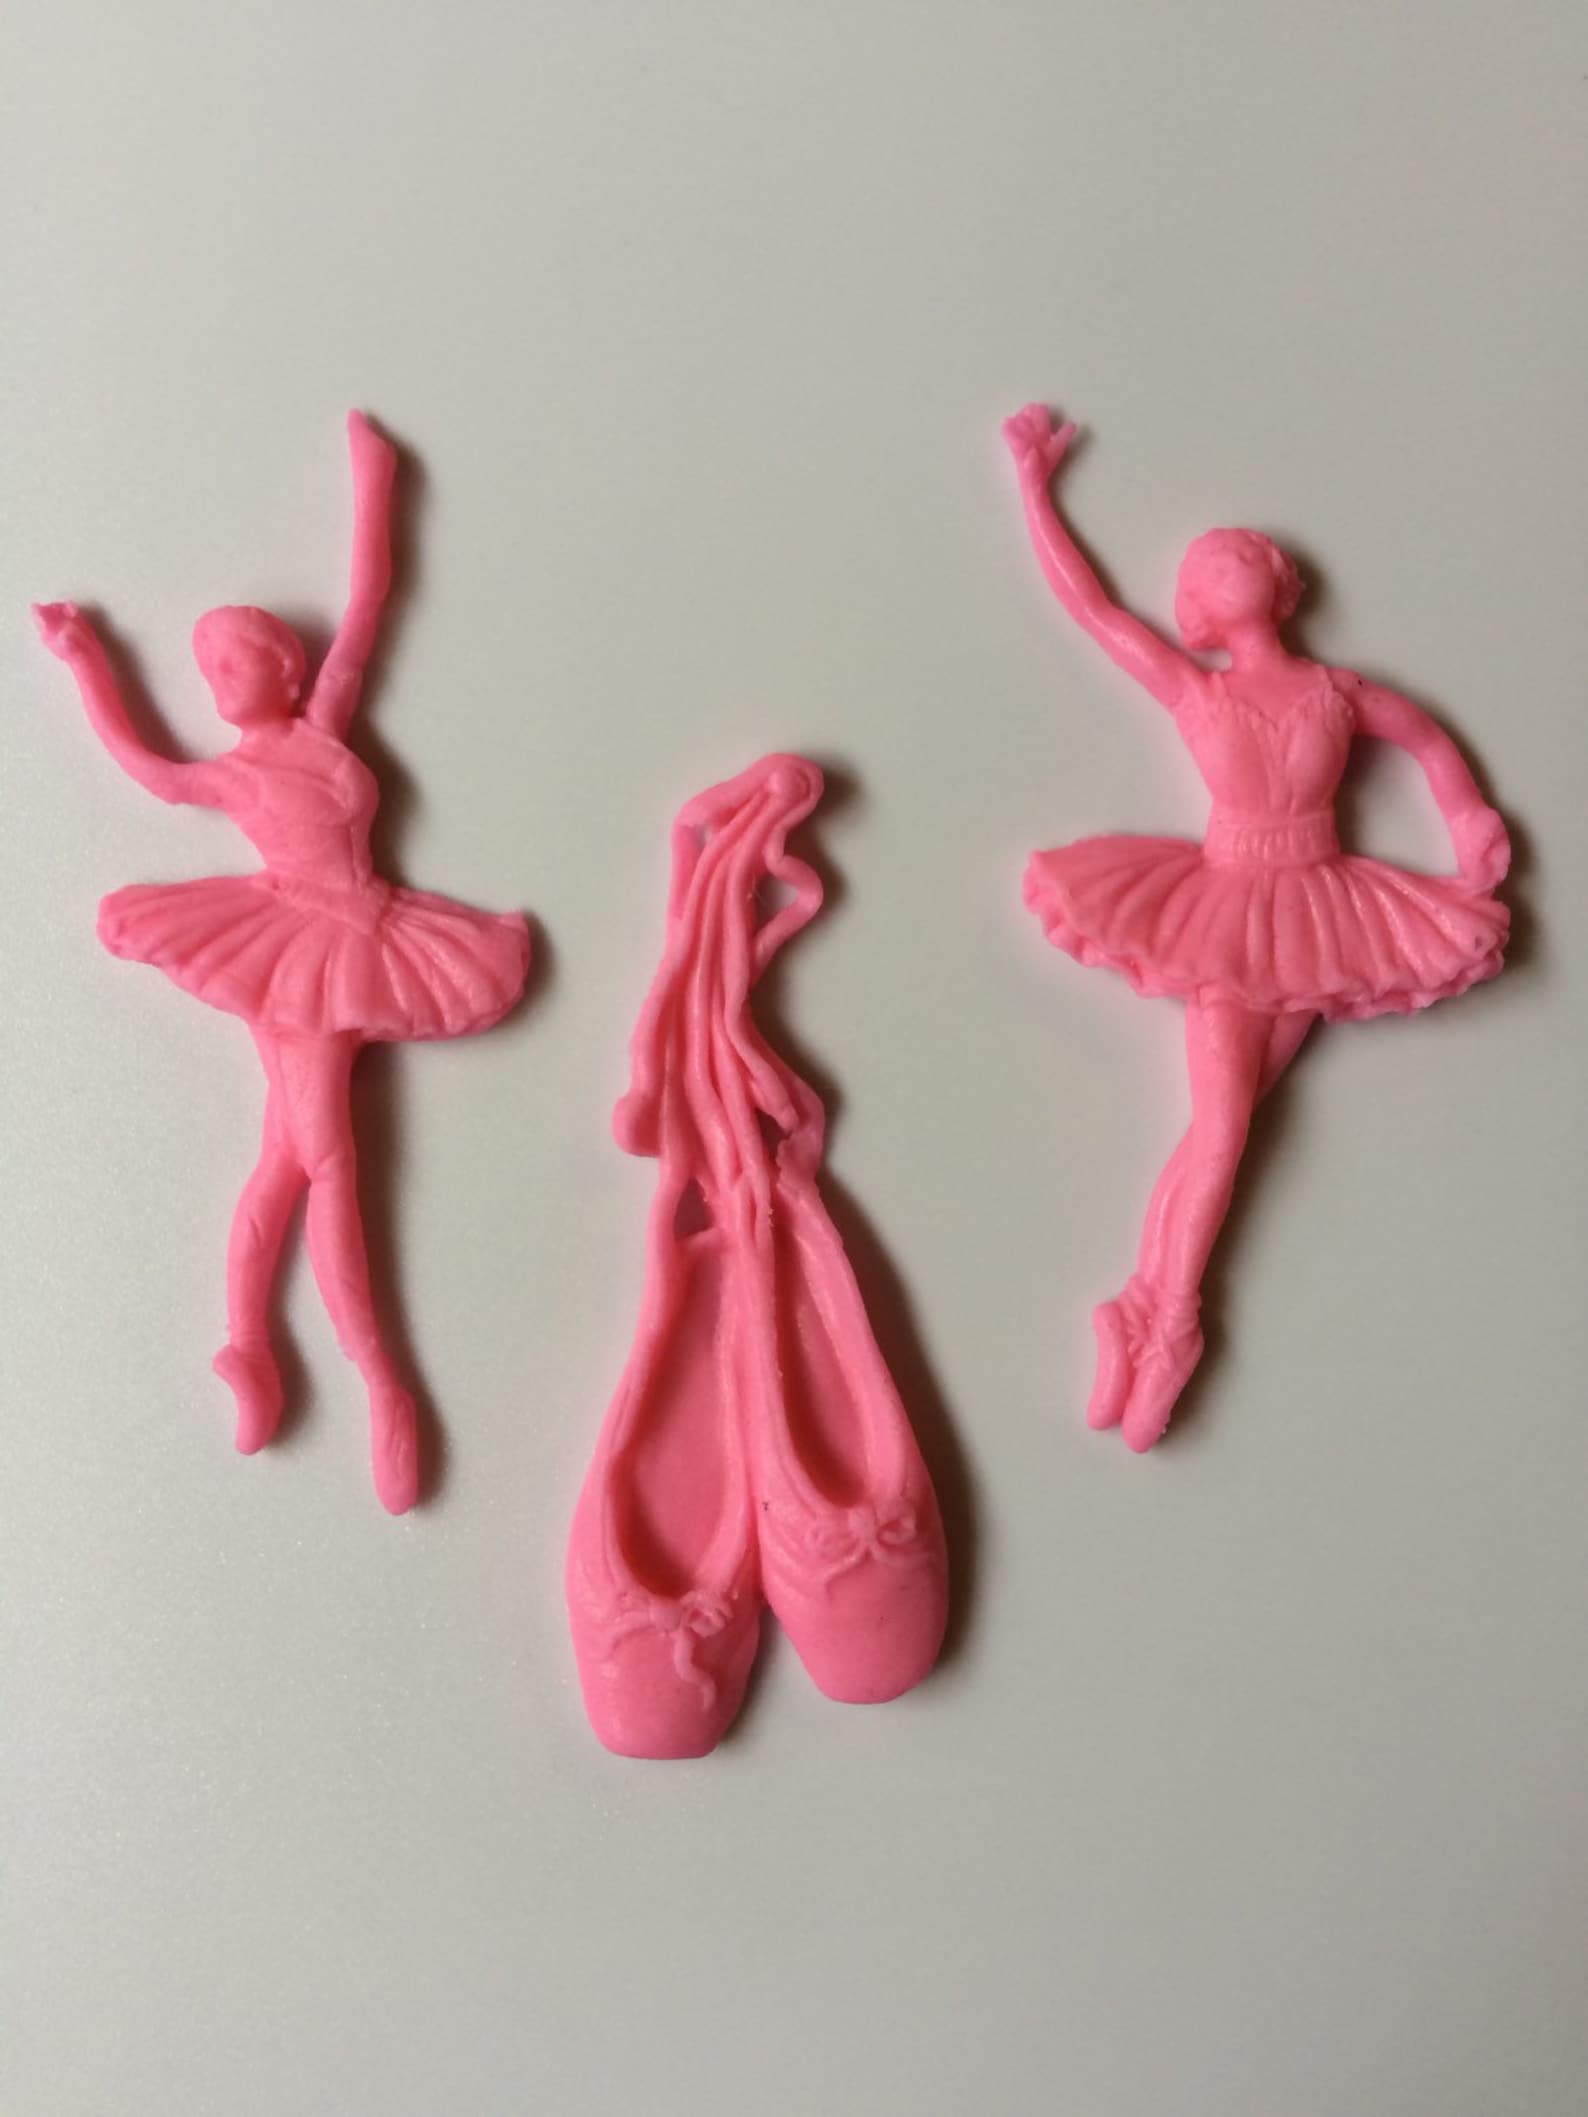 ballerina cake topper 12pcs ballet cupcake toppers edible fondant shoes cookie decorations birthday theme party favors